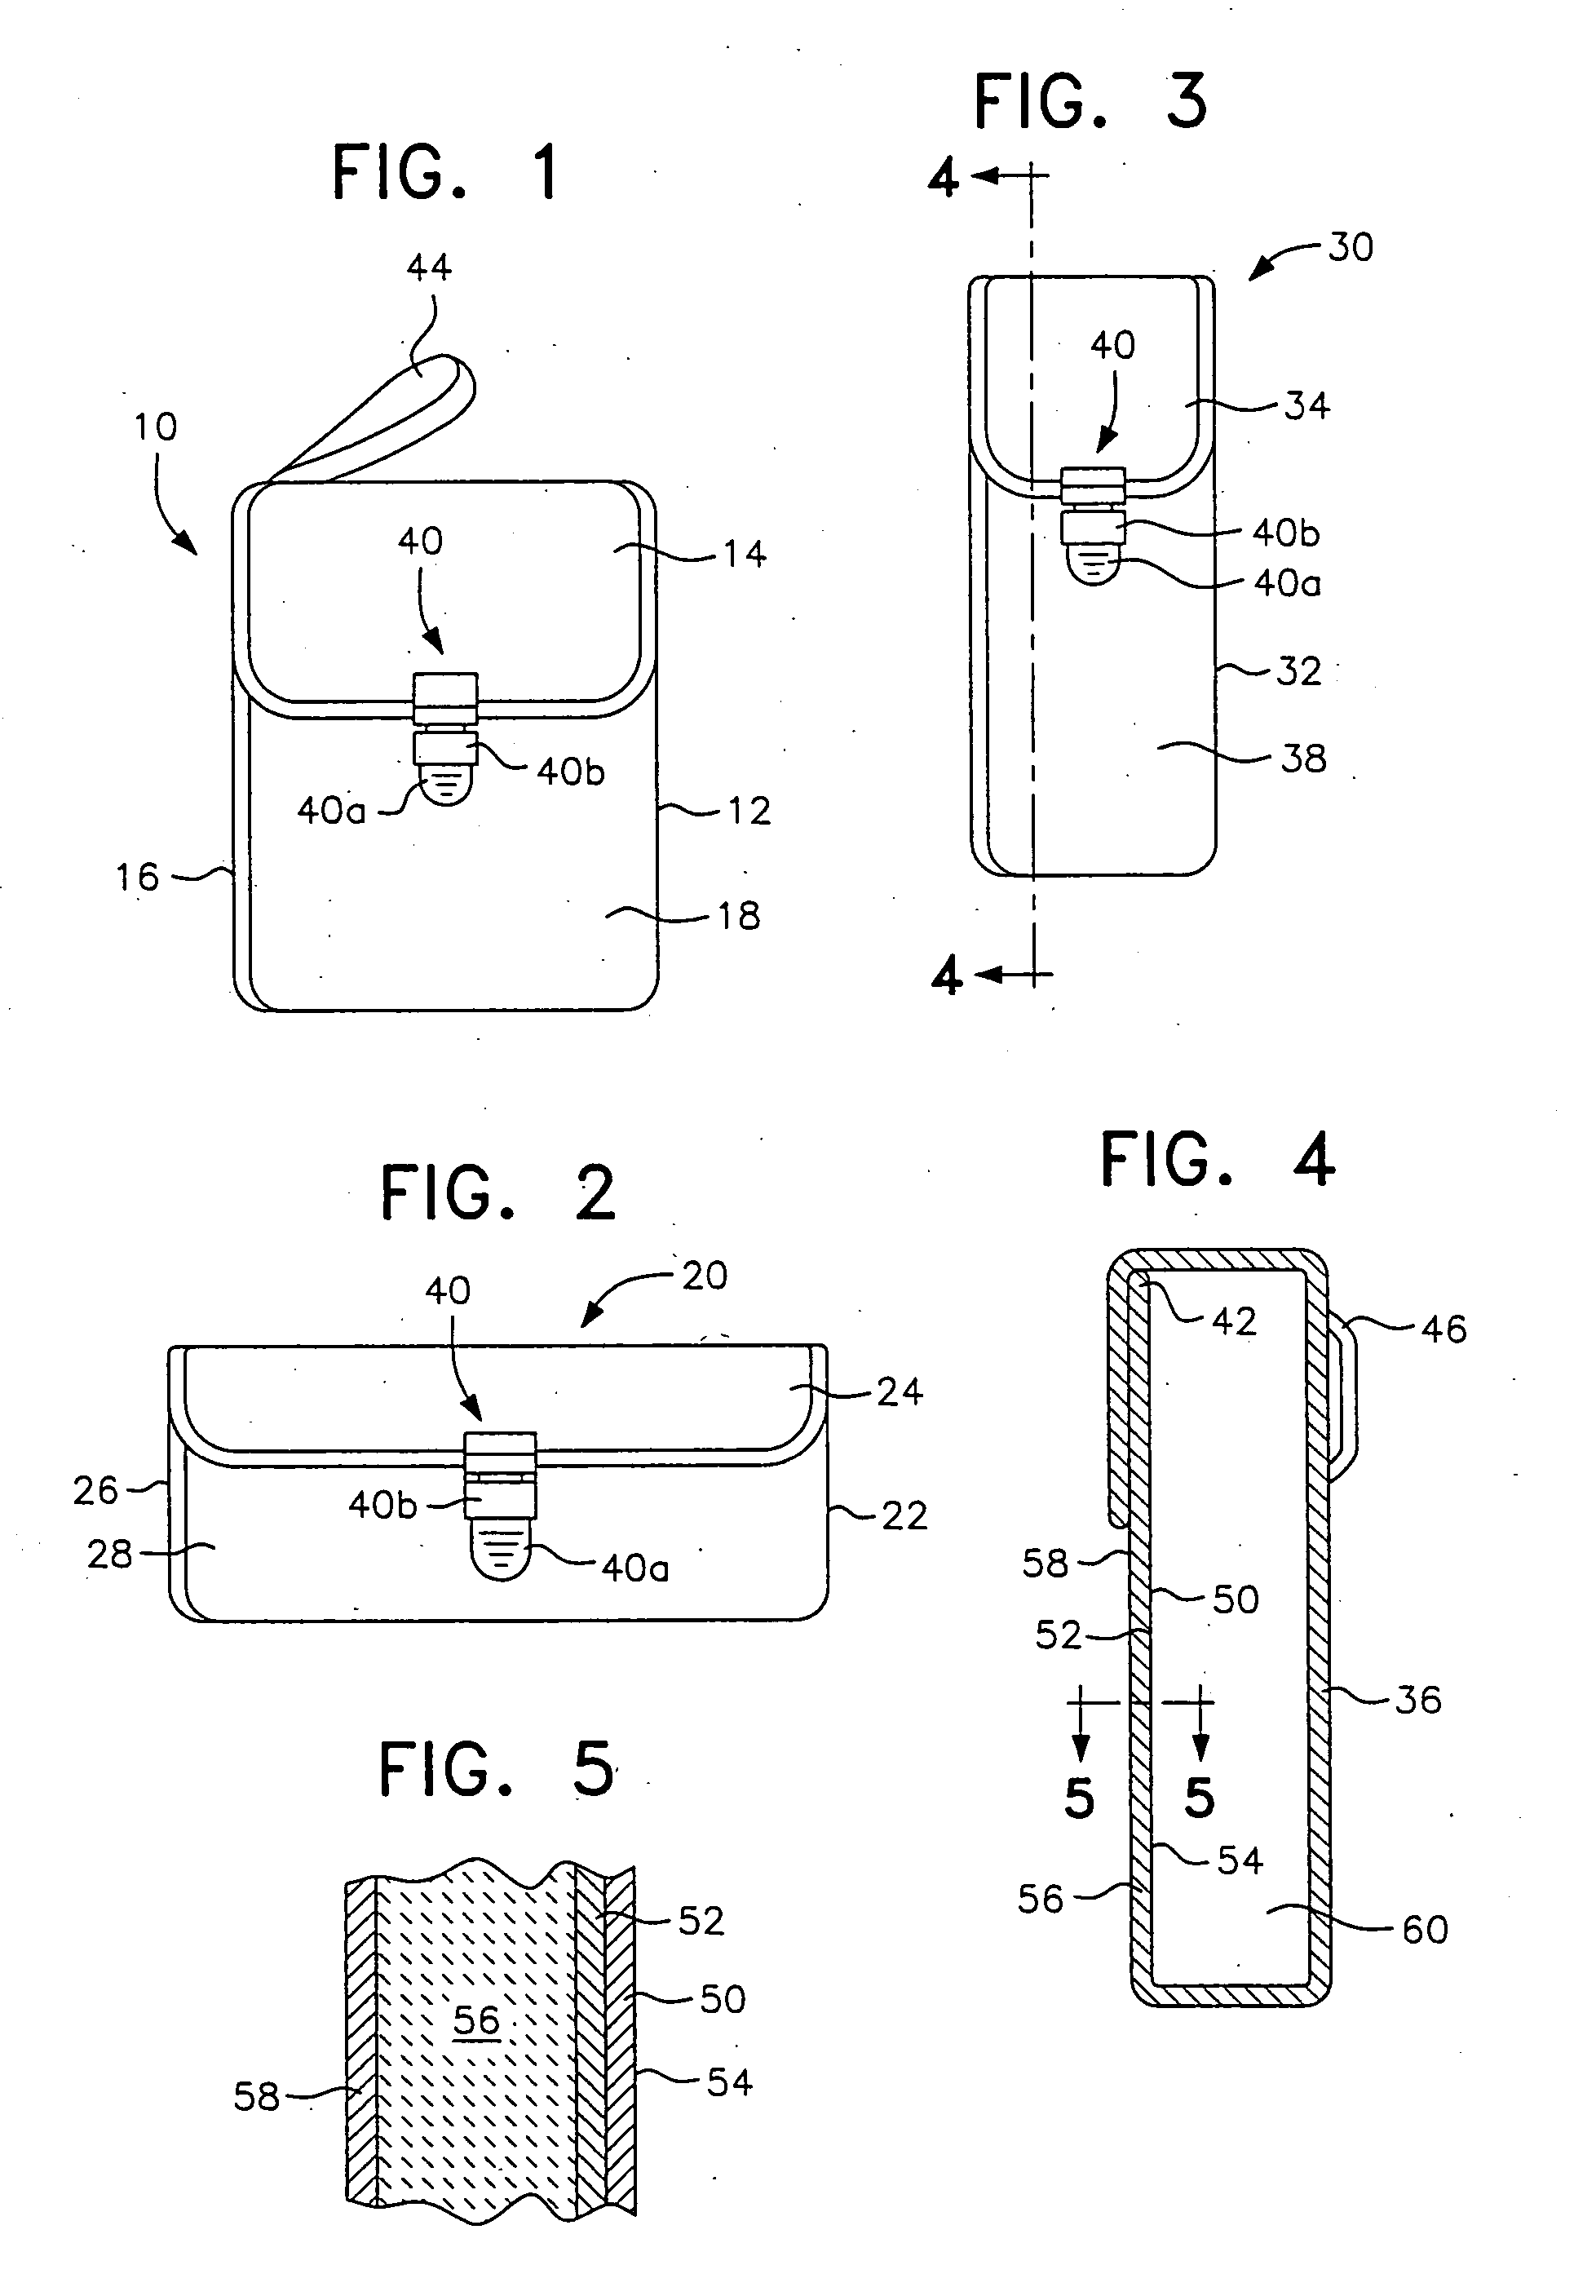 Personal electromagnetic security unit and method for electromagnetically shielding portable electronic communication and data devices and the like